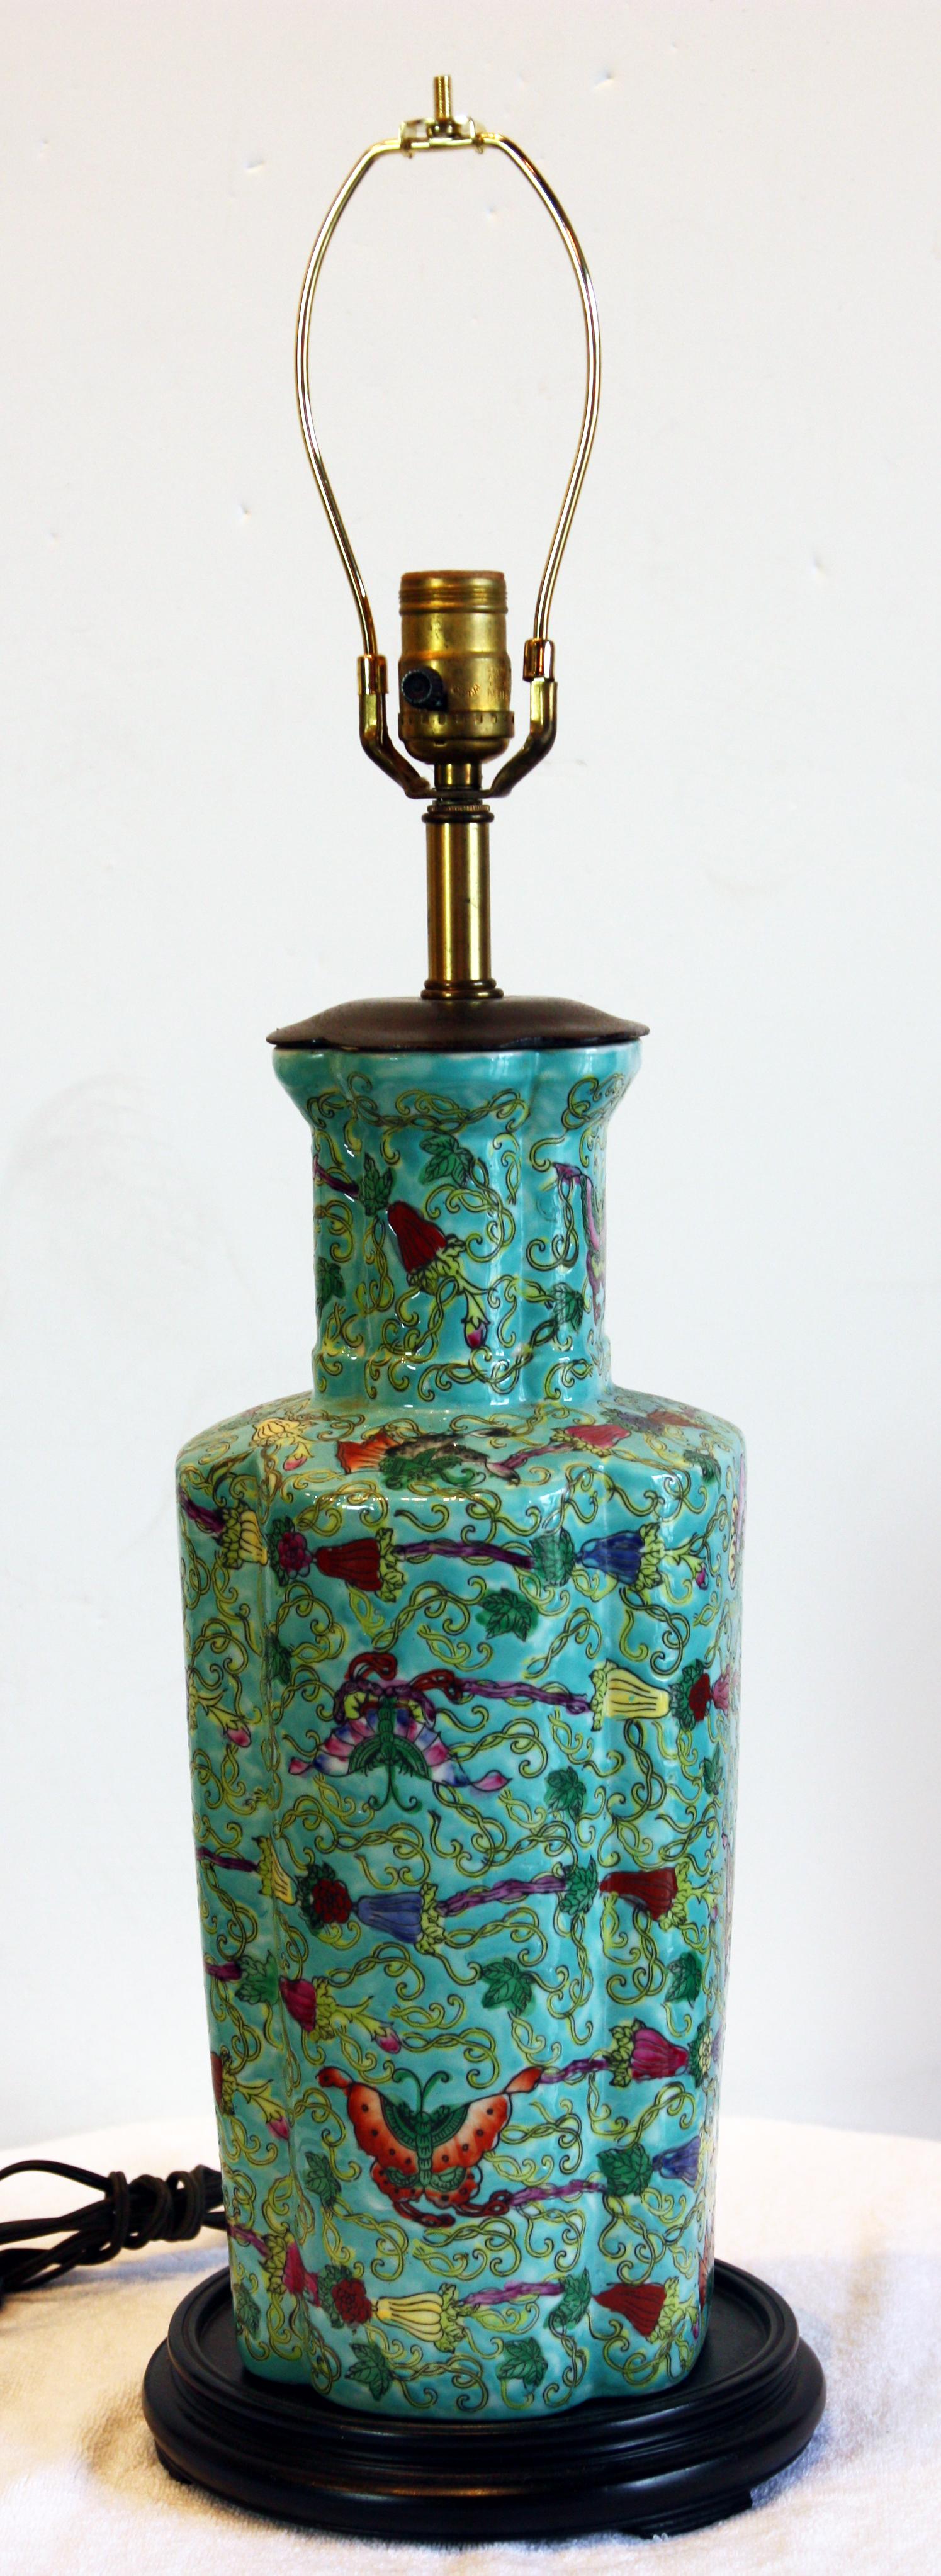 Green, hand-painted, Asian vase lamp on wooden stand. Adorned with flowers and butterflies. Shade included.